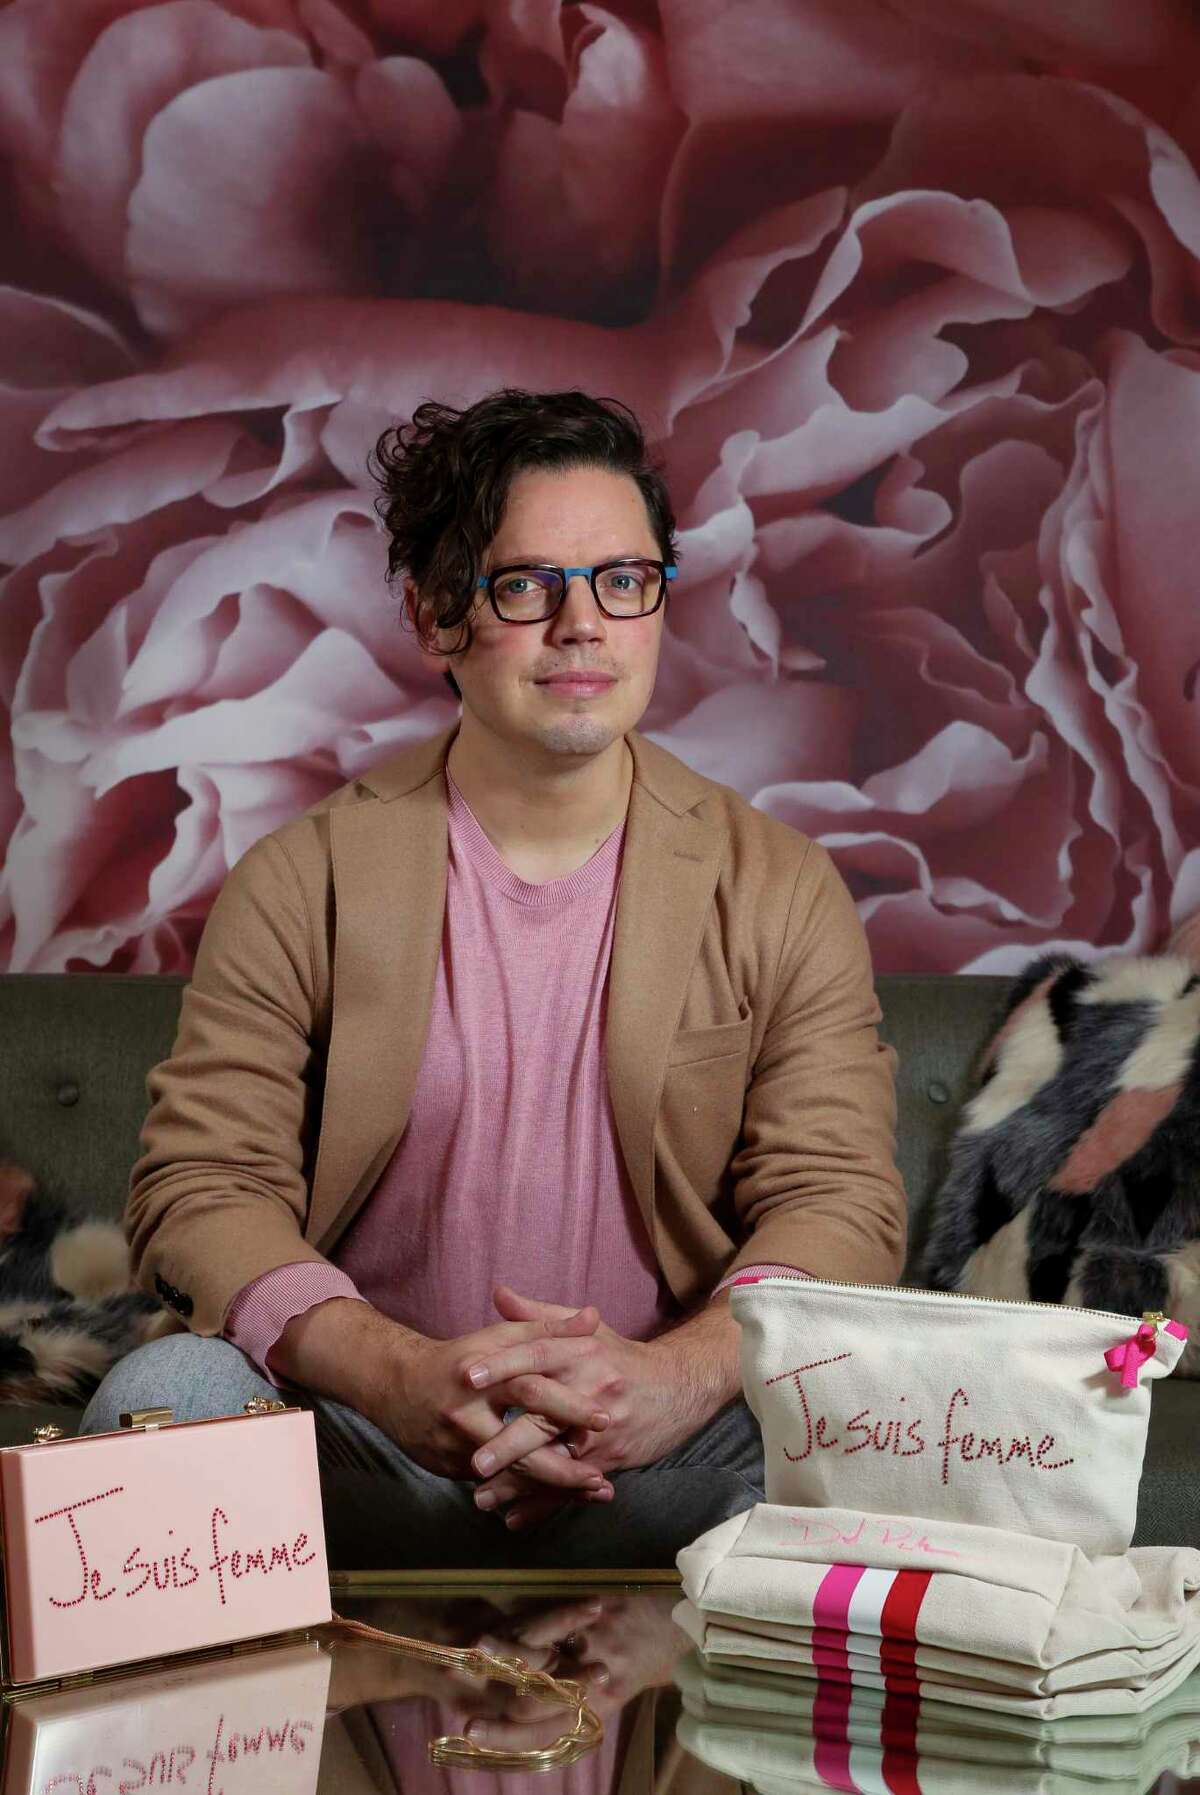 Houston fashion designer David Peck partnered with Susan G Komen Breast Cancer Houston on special-edition pink acrylic bags and travel pouches benefitting the organization.